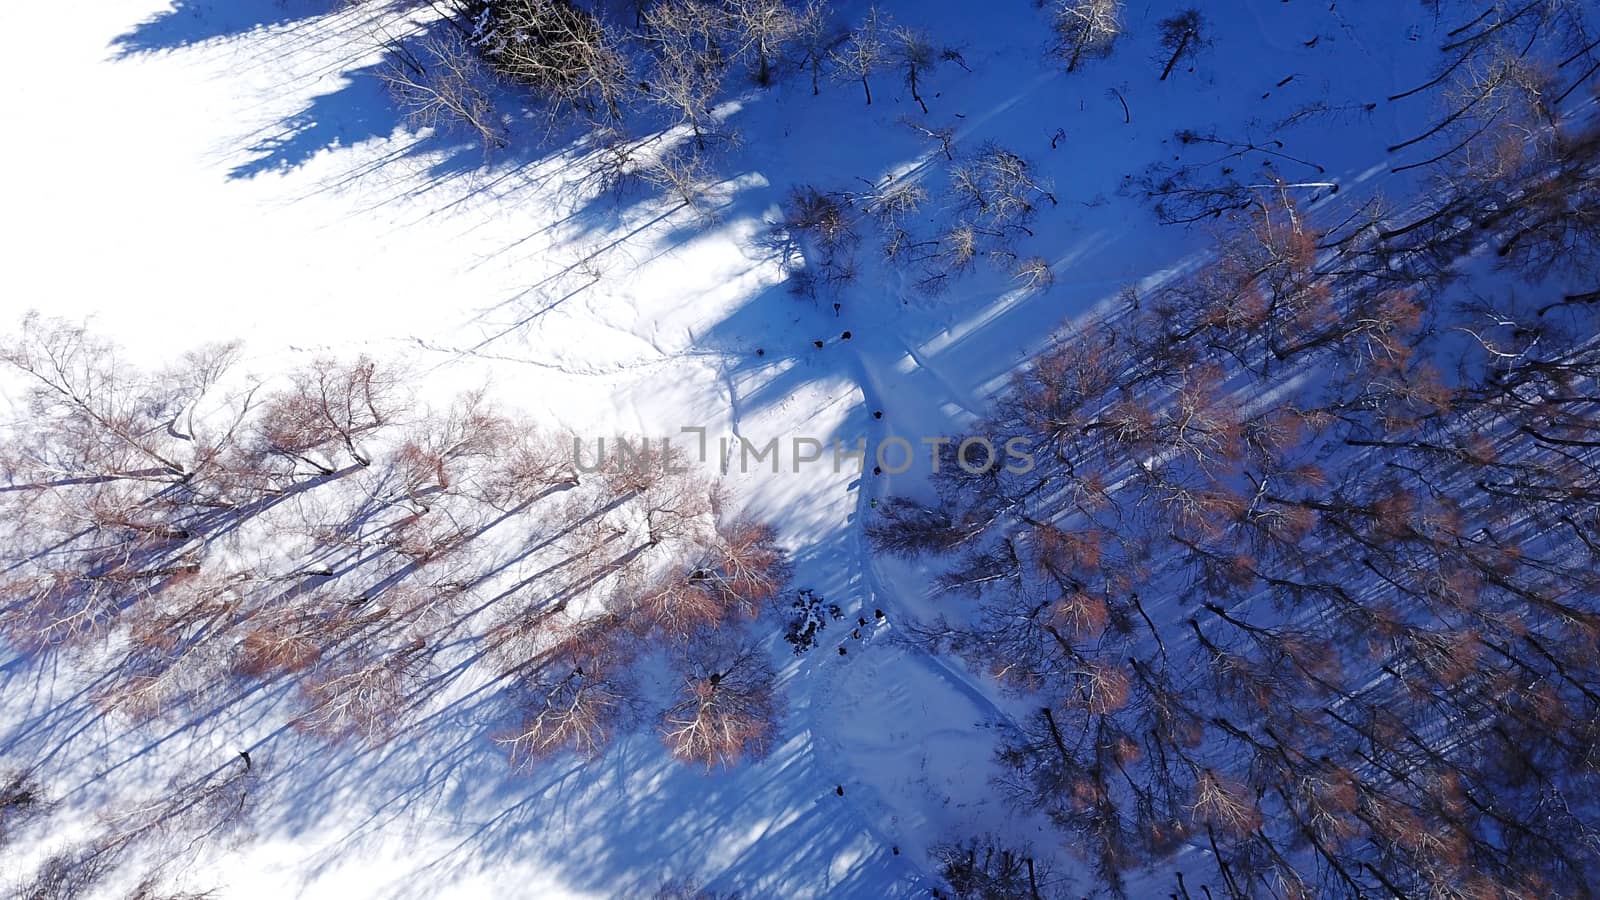 Active recreation of people in the mountains. Top view from the throne. A group of people walking along a trail in a snowy forest in the mountains. The trees cast shadows on the snow. Sunny day.